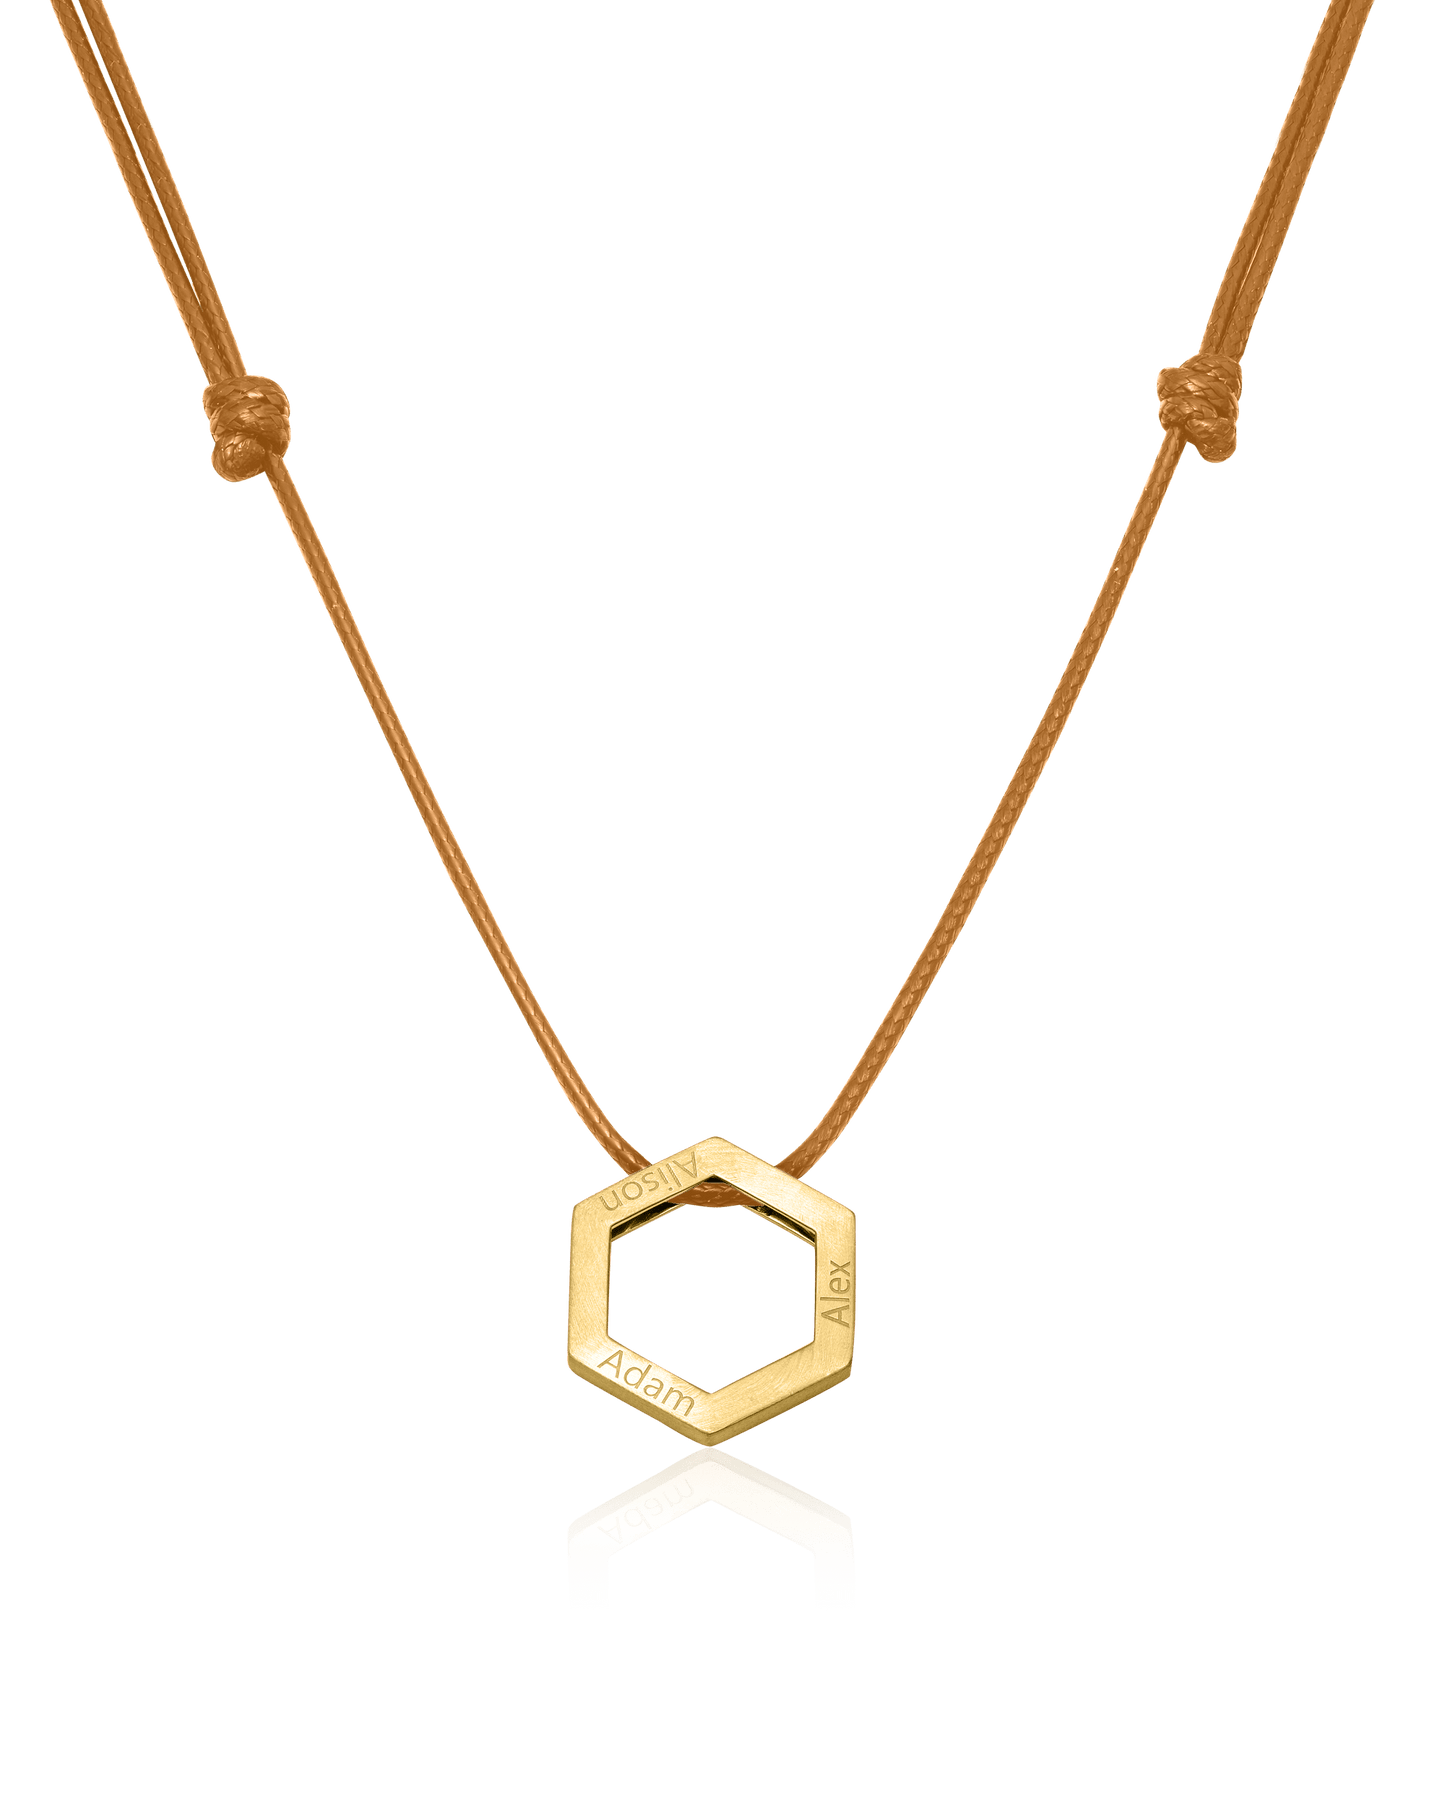 Honeycomb Necklace - 18K Gold Vermeil Necklaces magal-dev Brown 1 Name Adjustable Cord Chain 20"-24"